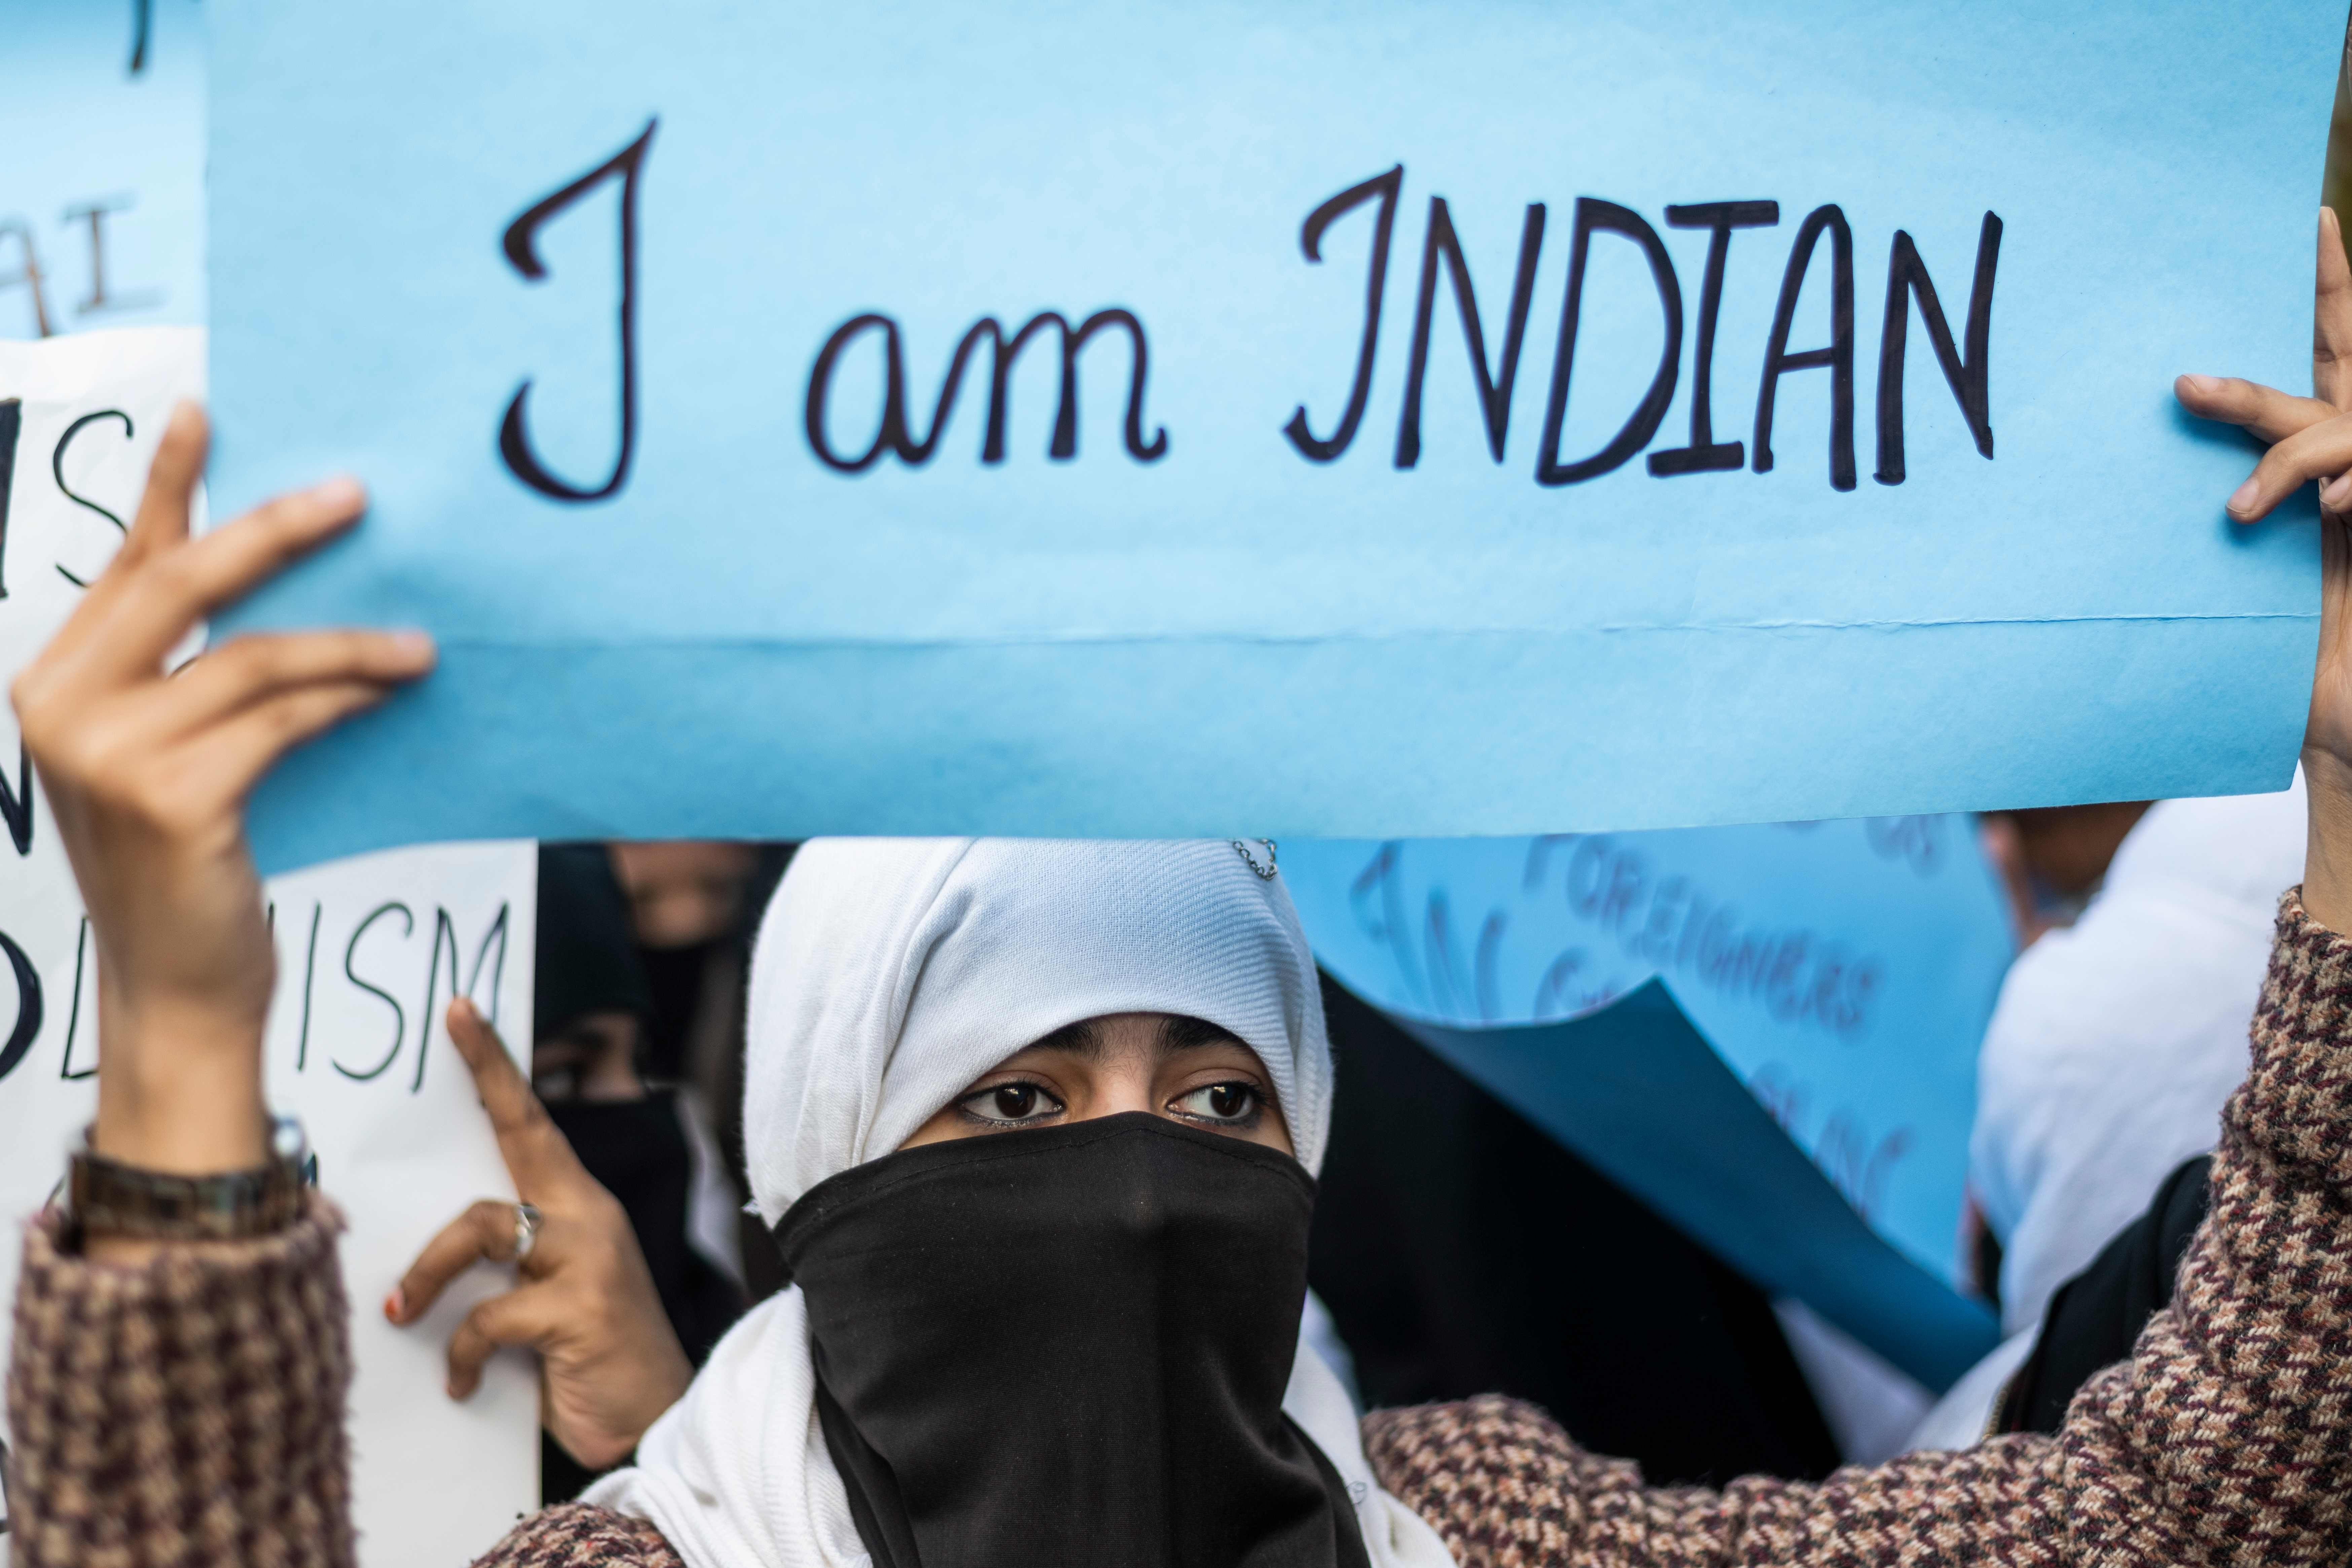 A woman holds up a placard during a protest against the Indian government’s Citizenship (Amendment) Bill in New Delhi on December 14. Photo: AFP